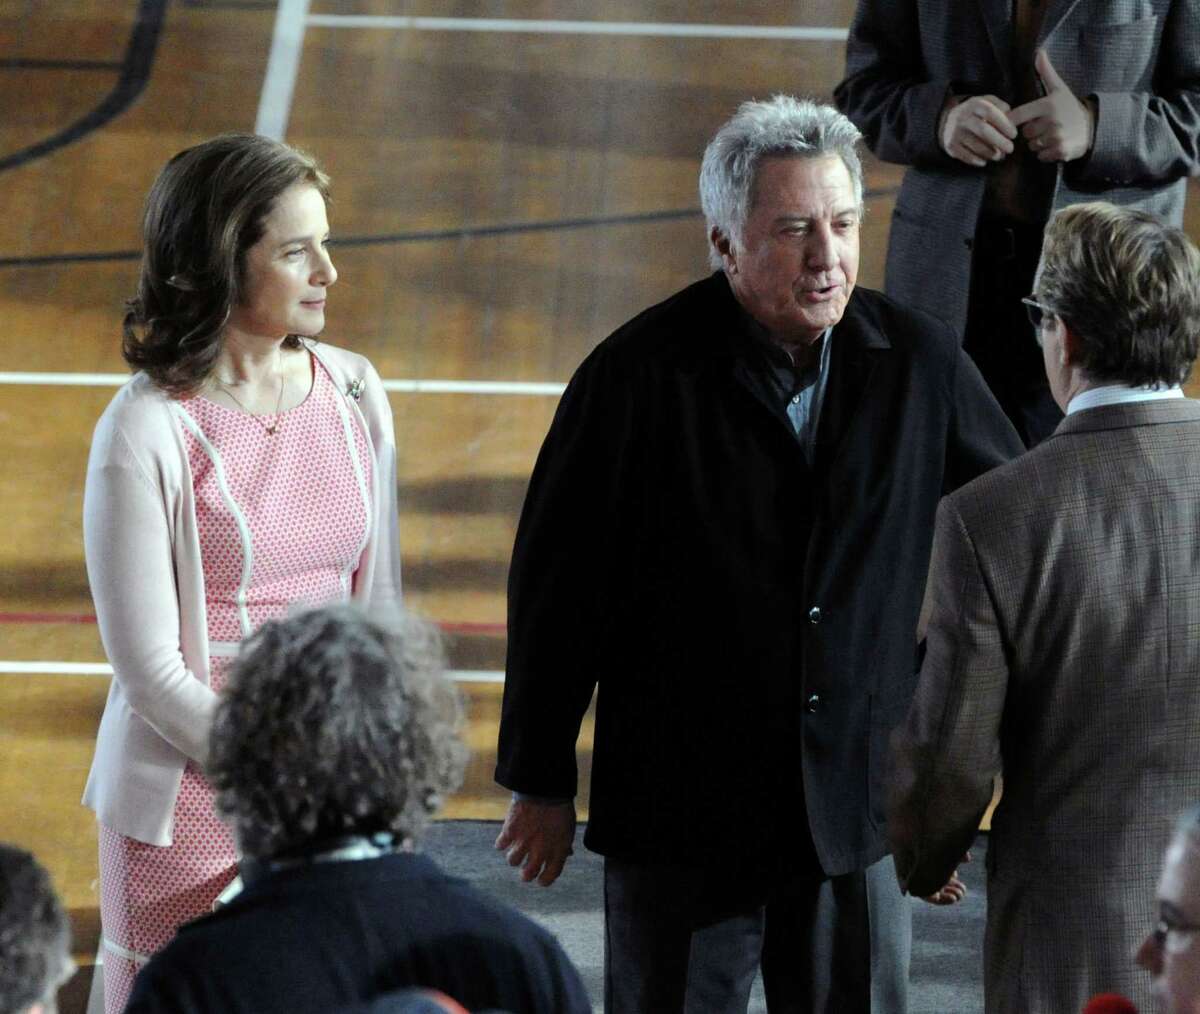 Actor Dustin Hoffman, right, on the set of "Boychoir," that was filming at the Greenwich Civic Center in Old Greenwich, Conn.,Tuesday afternoon, March 11, 2014.